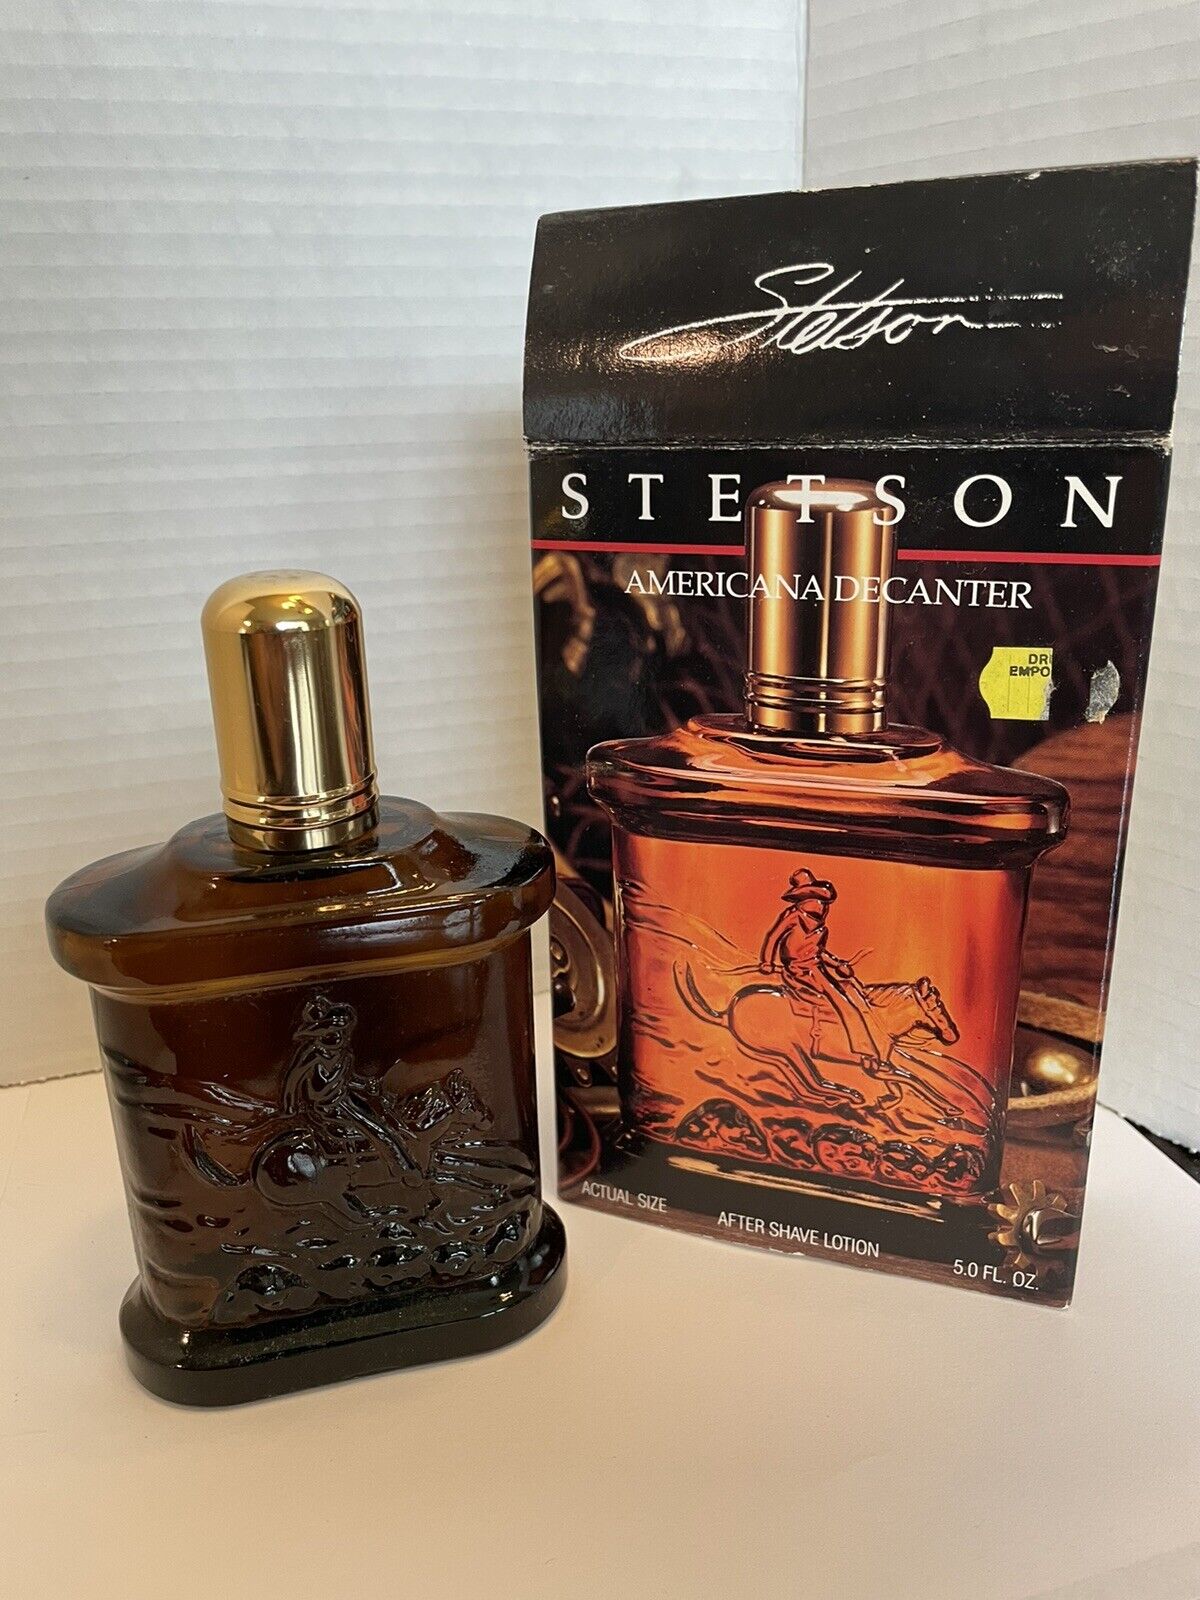 Vintage Stetson Americana Decanter After Shave Lotion 5oz New In Box FULL